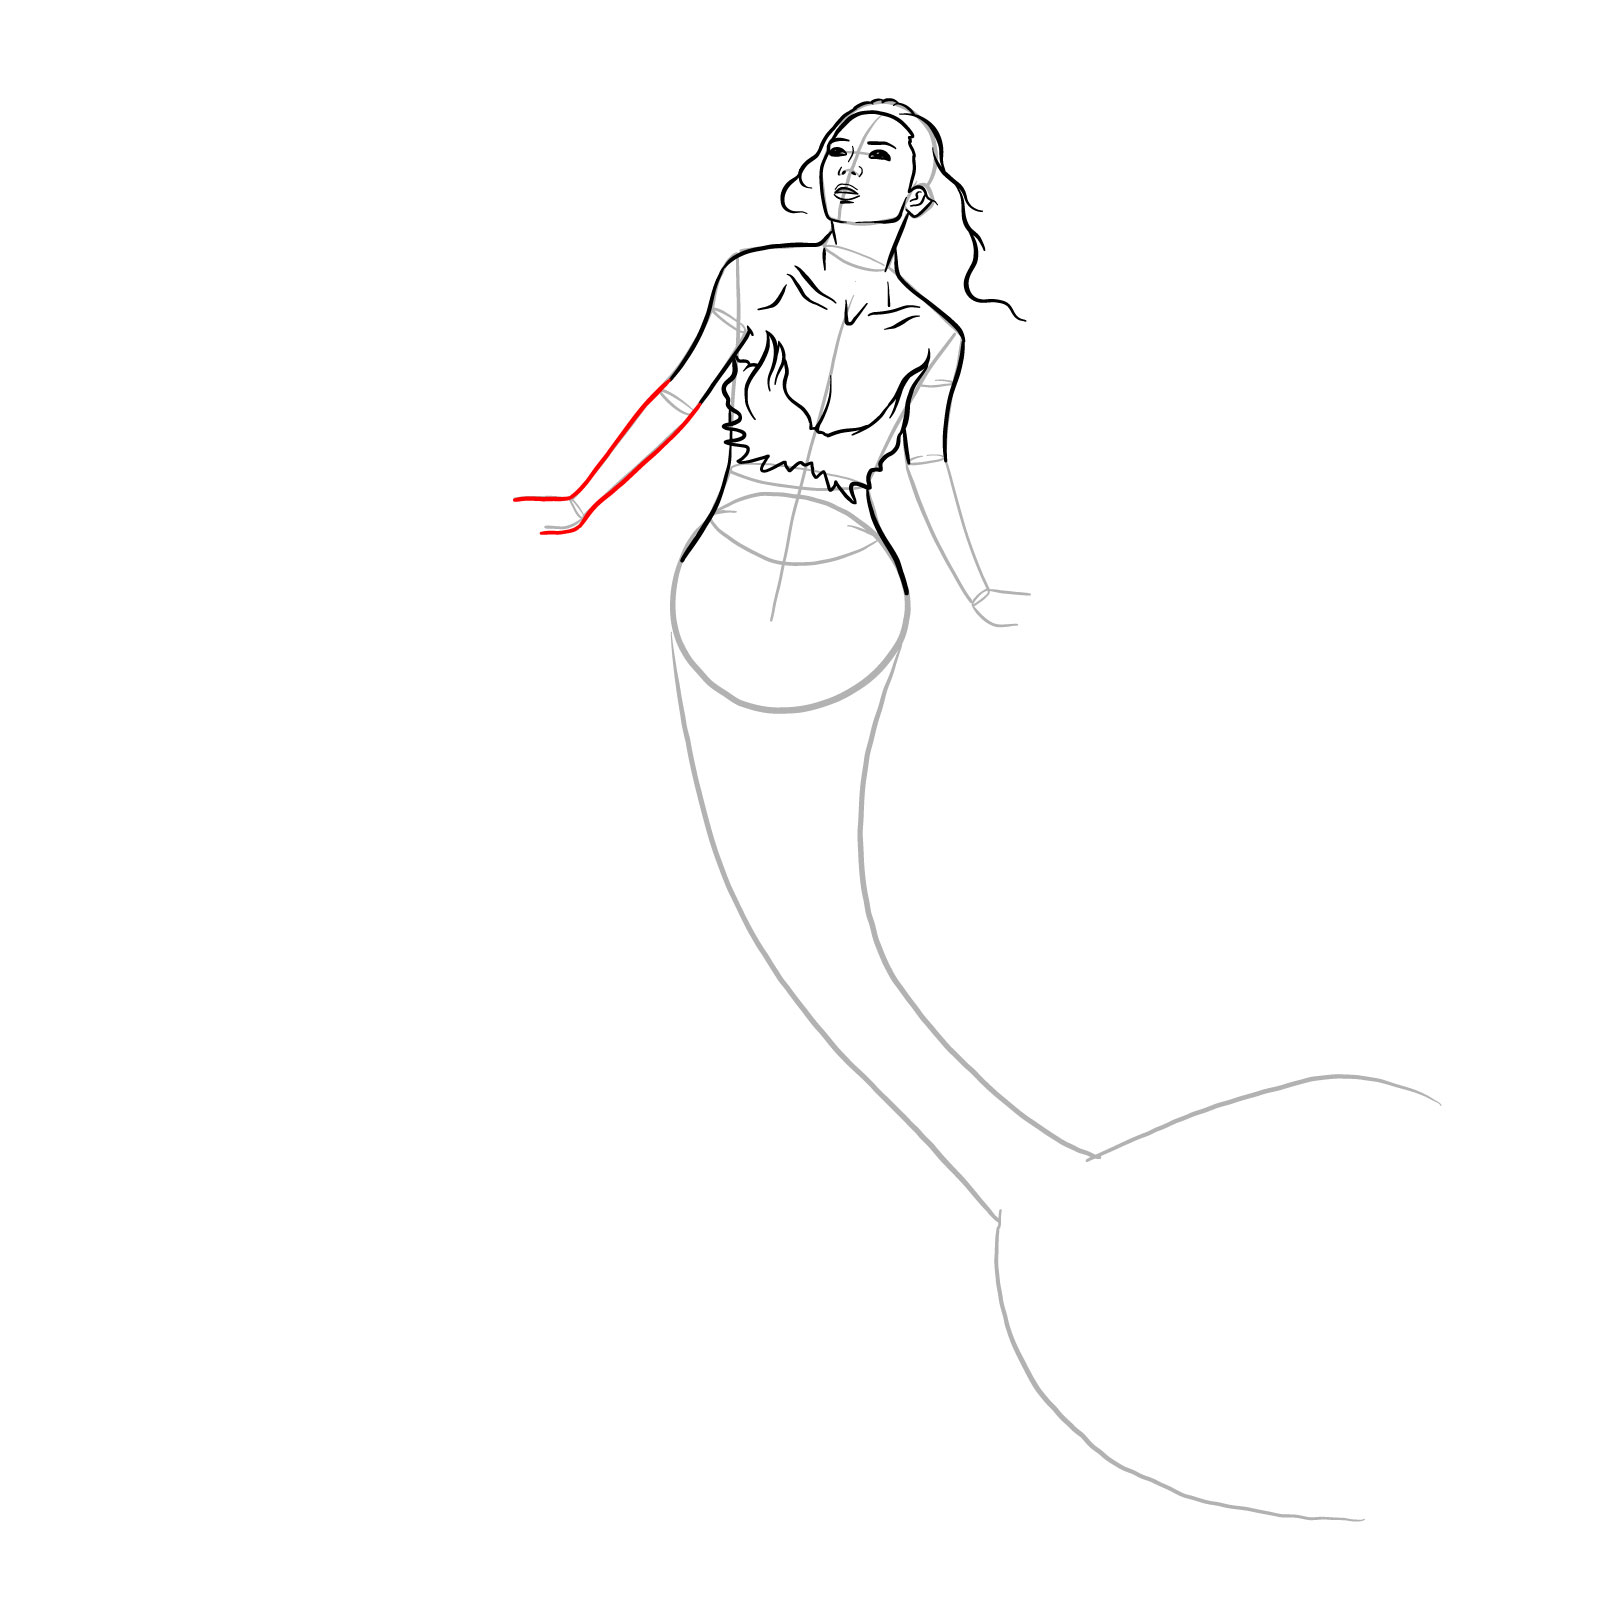 How to draw a Mermaid - step 15